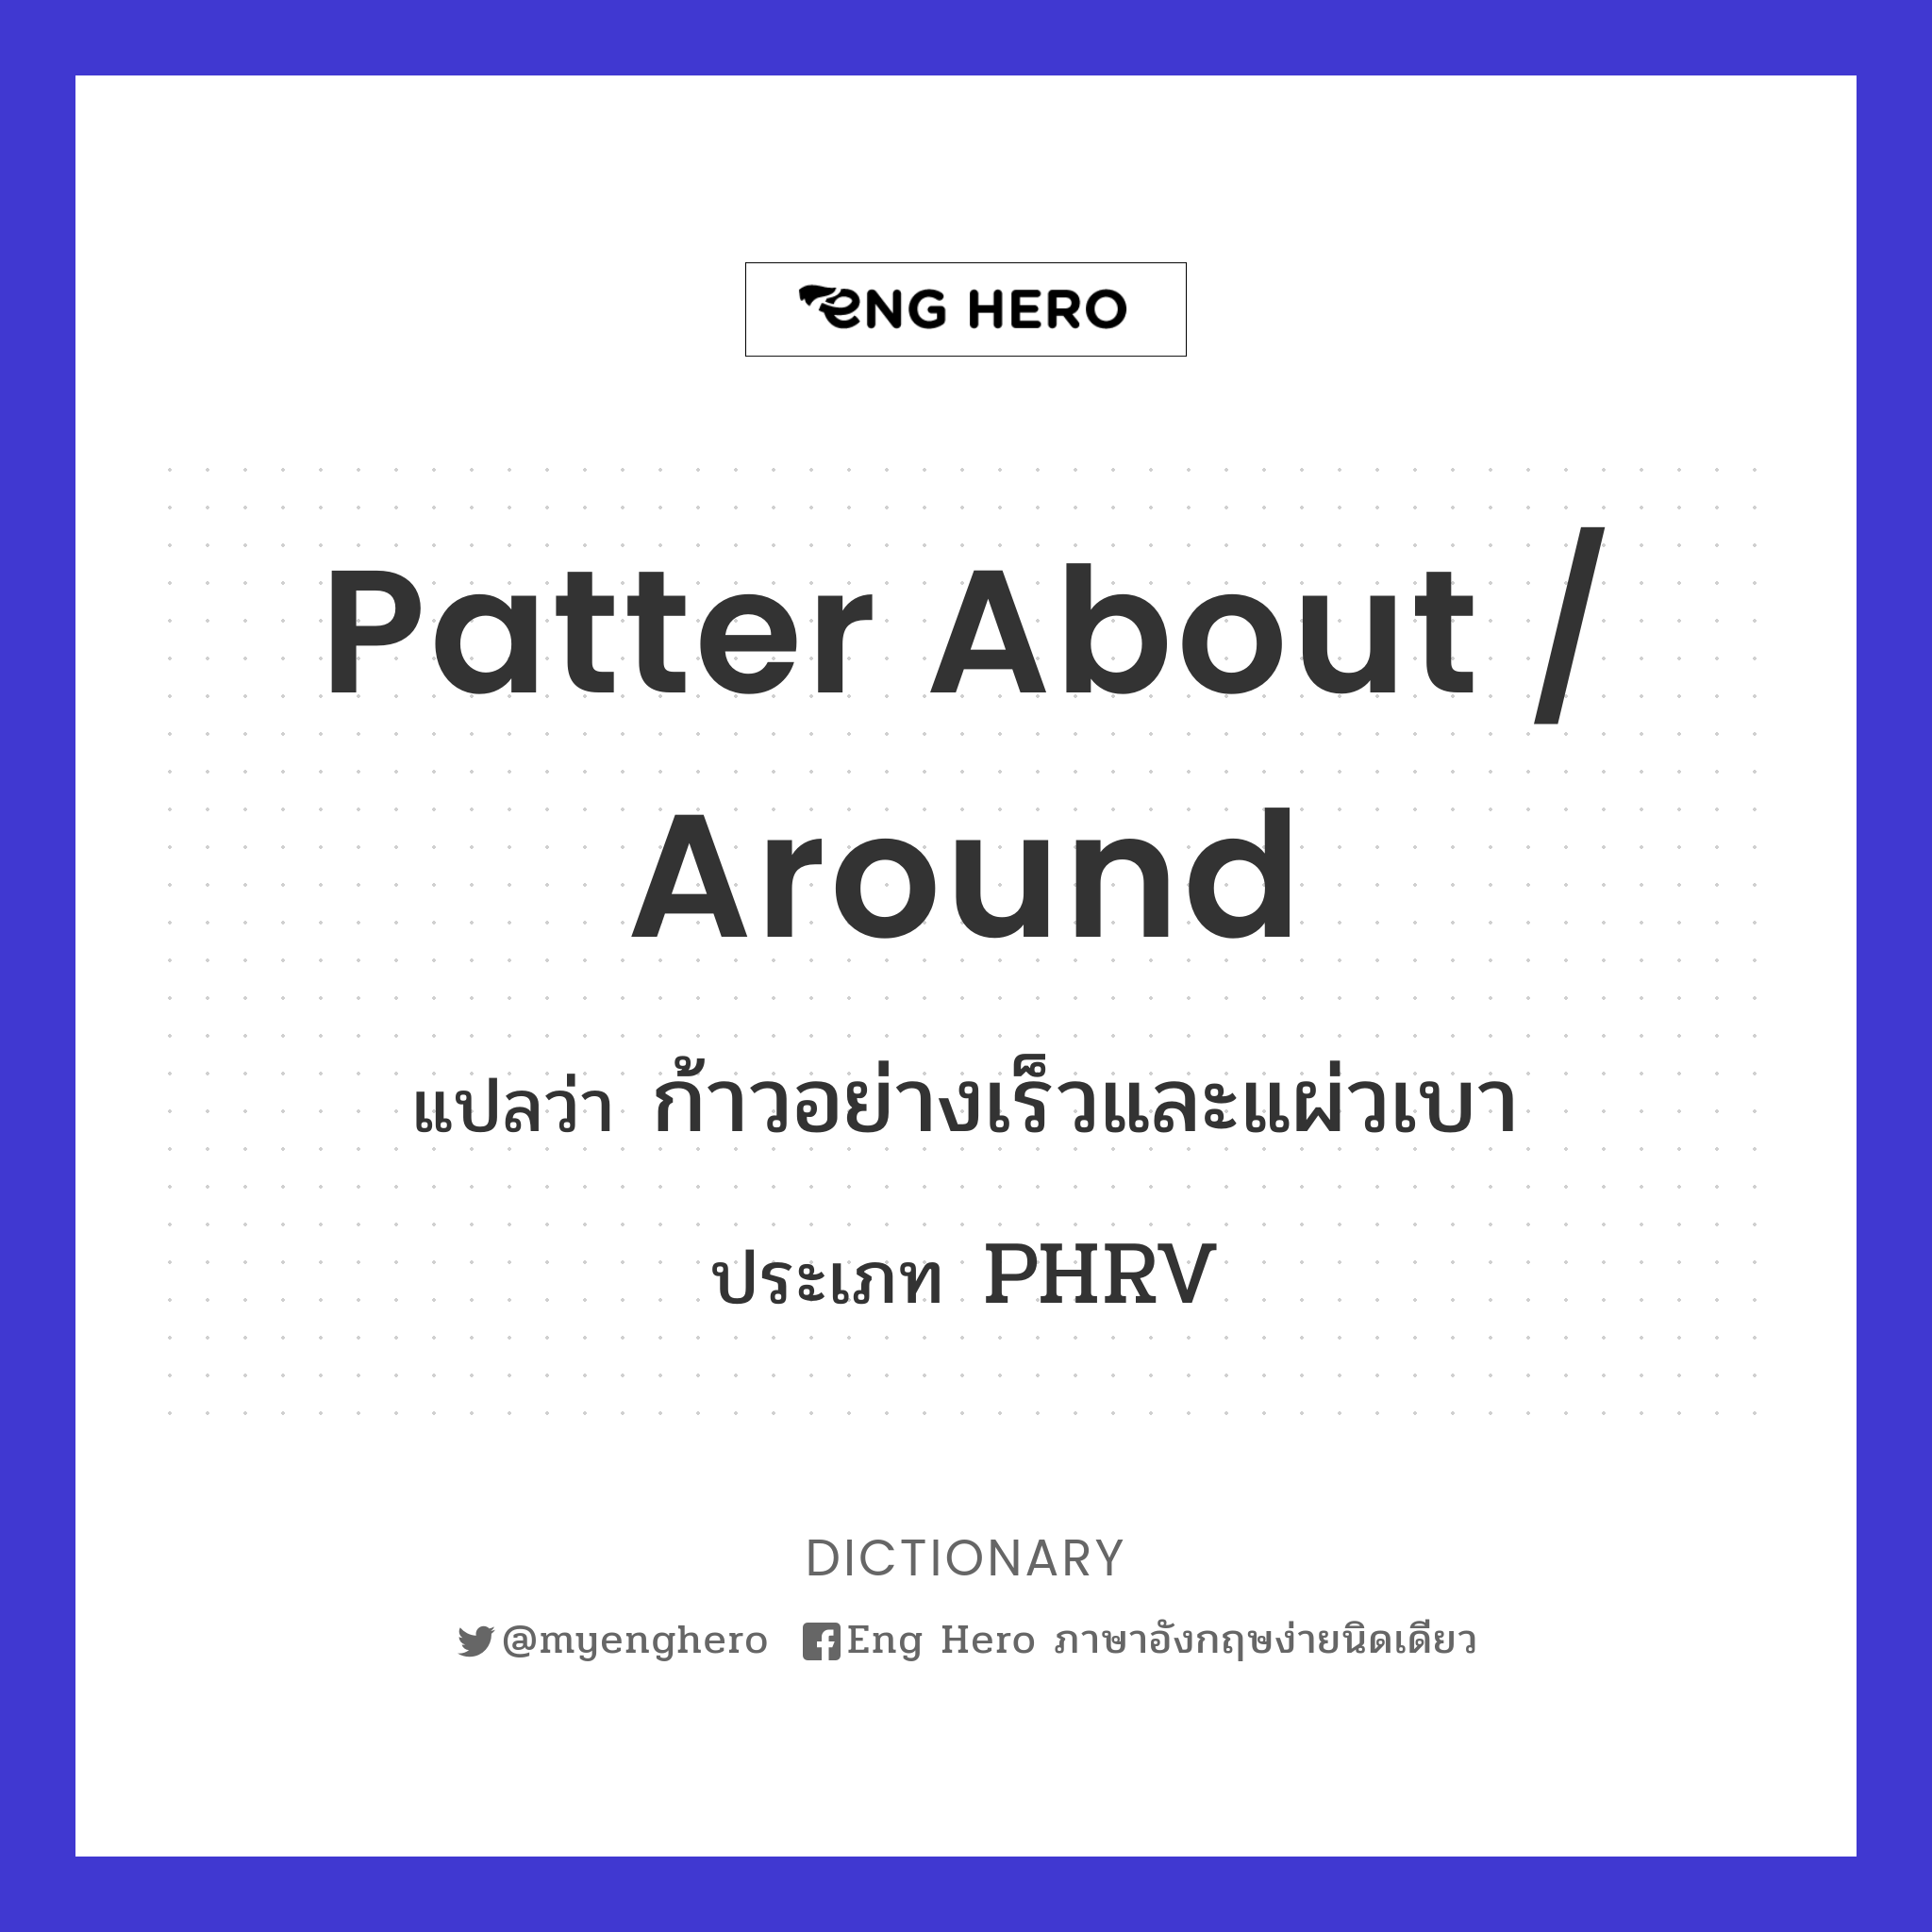 patter about / around